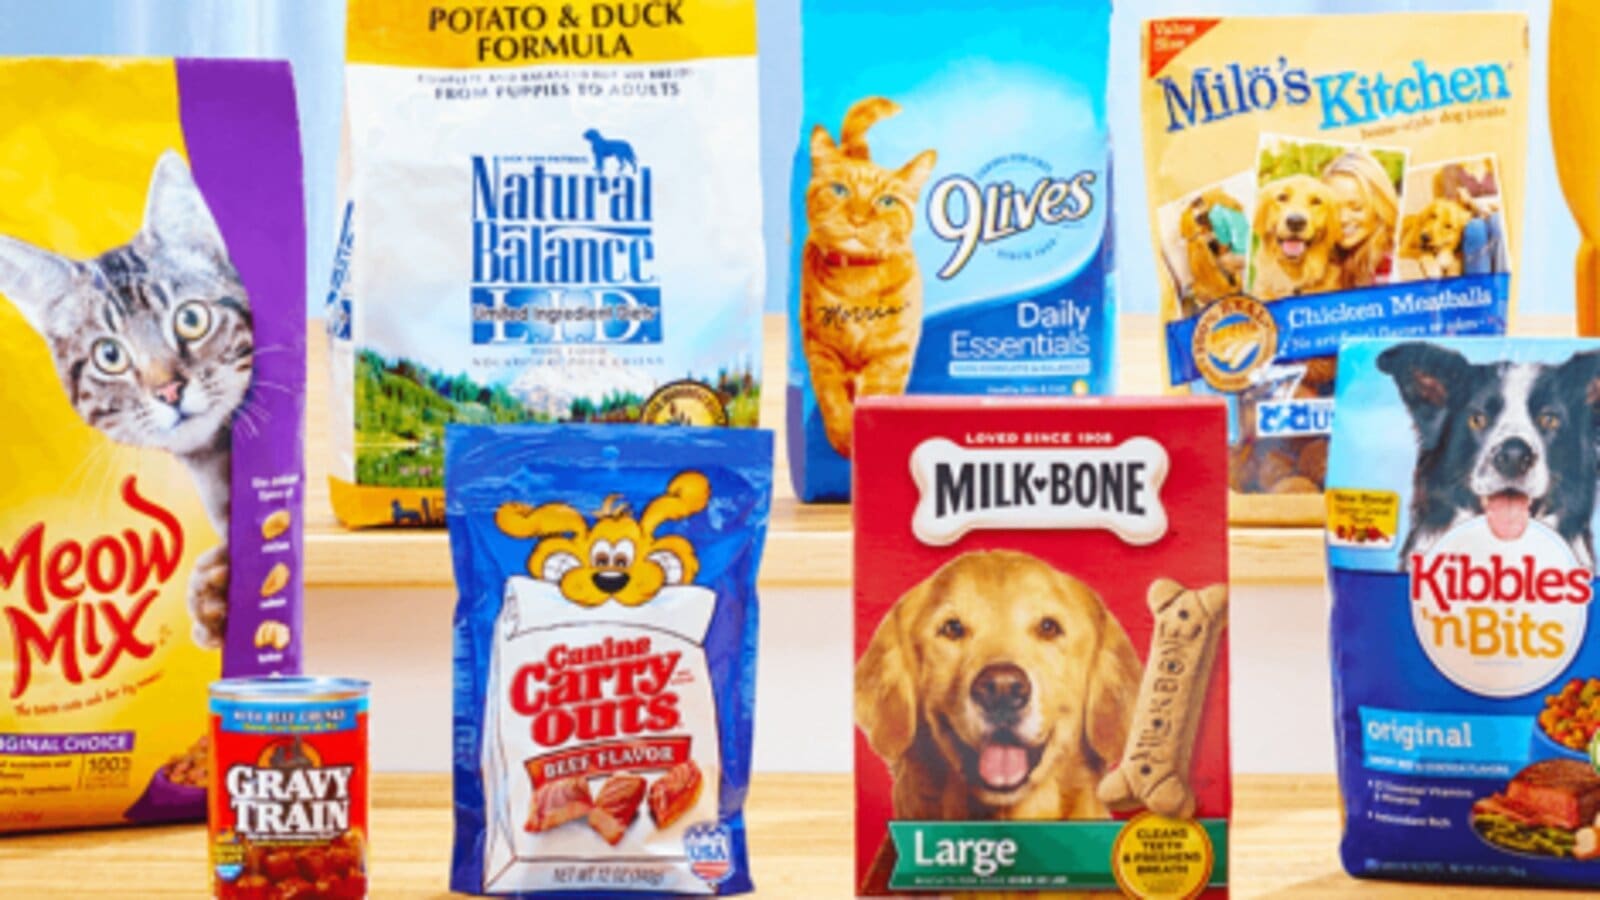 Post records 22% jump in net sales on strong performance in its pet food segment